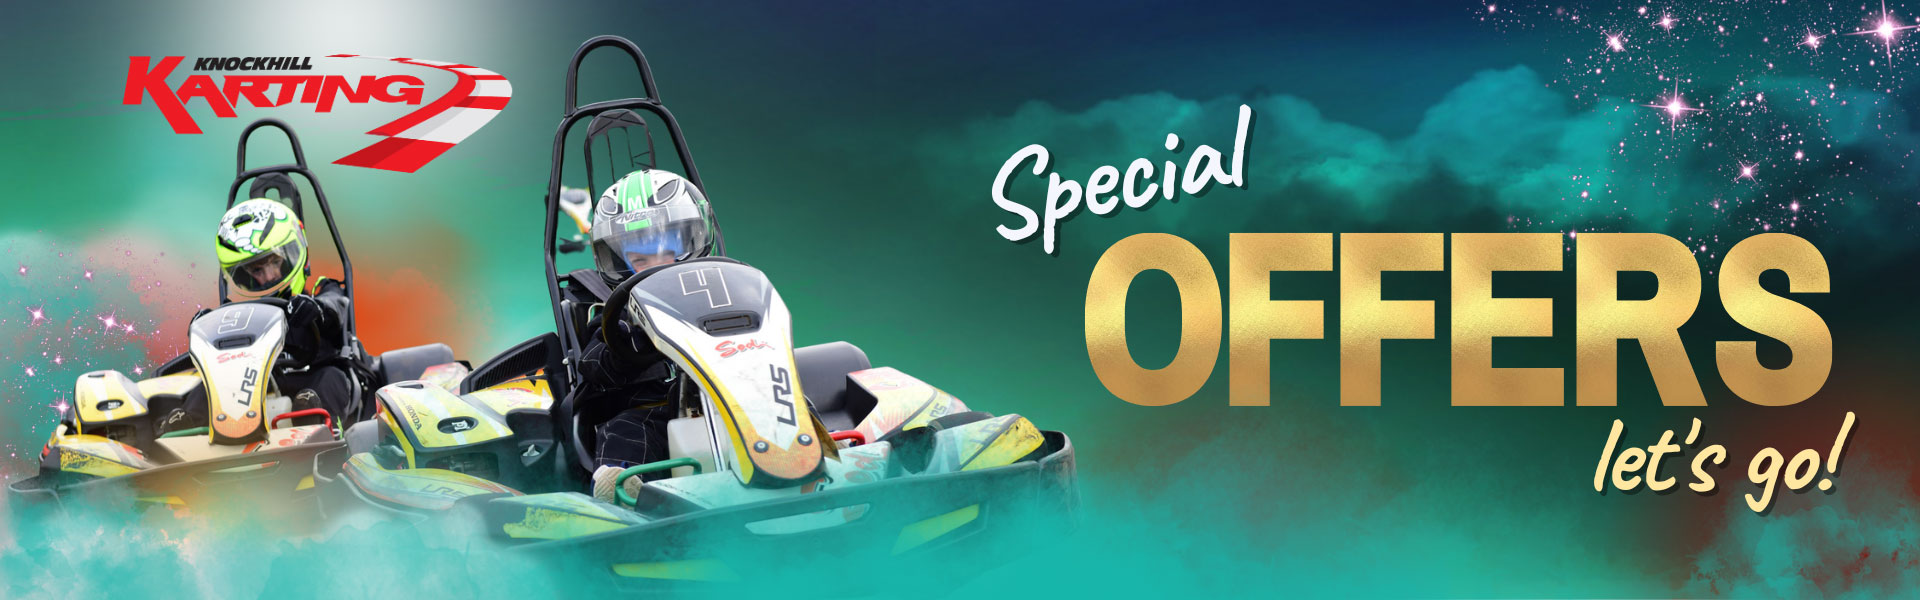 October Karting Special Offers